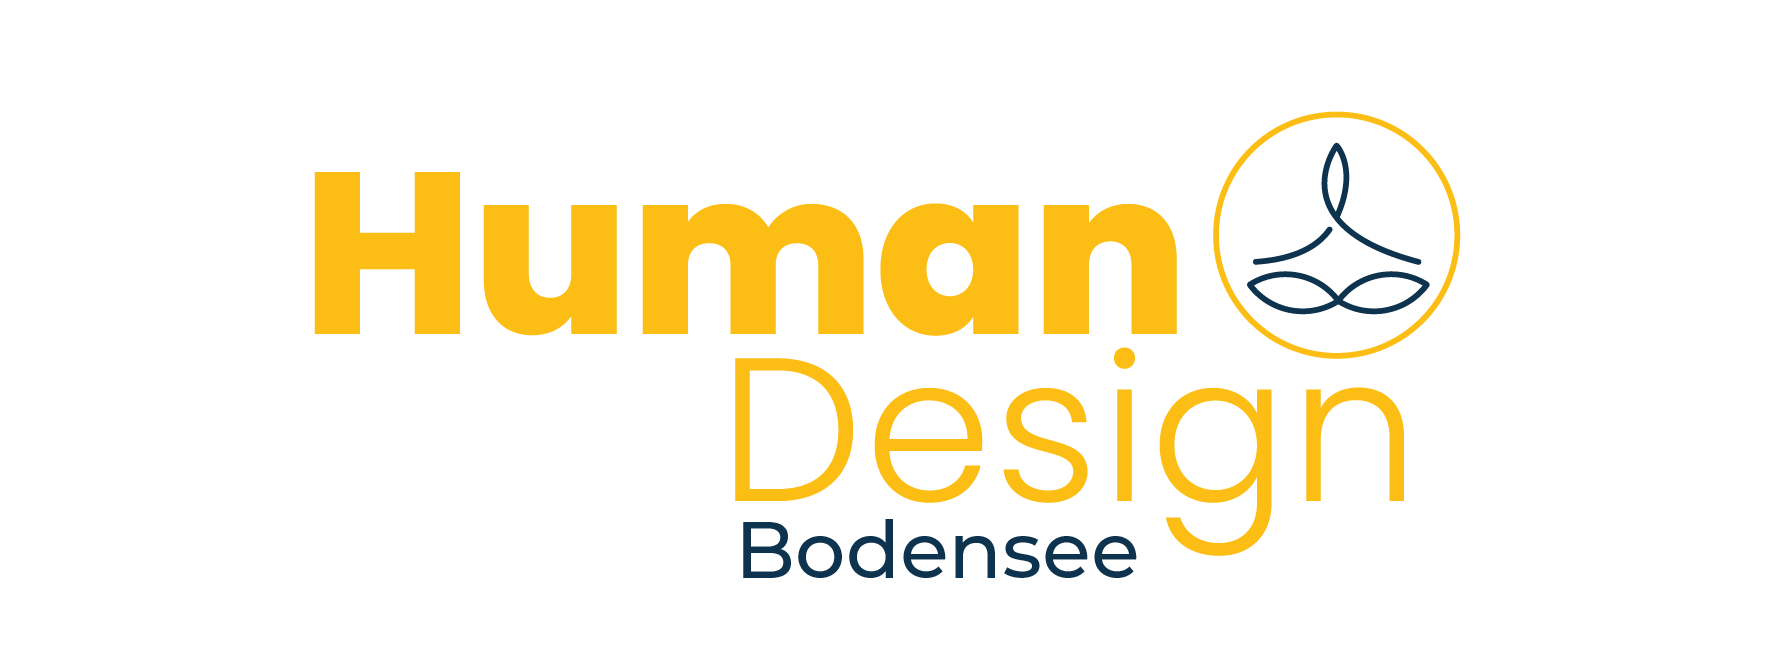 Humandesign-Bodensee